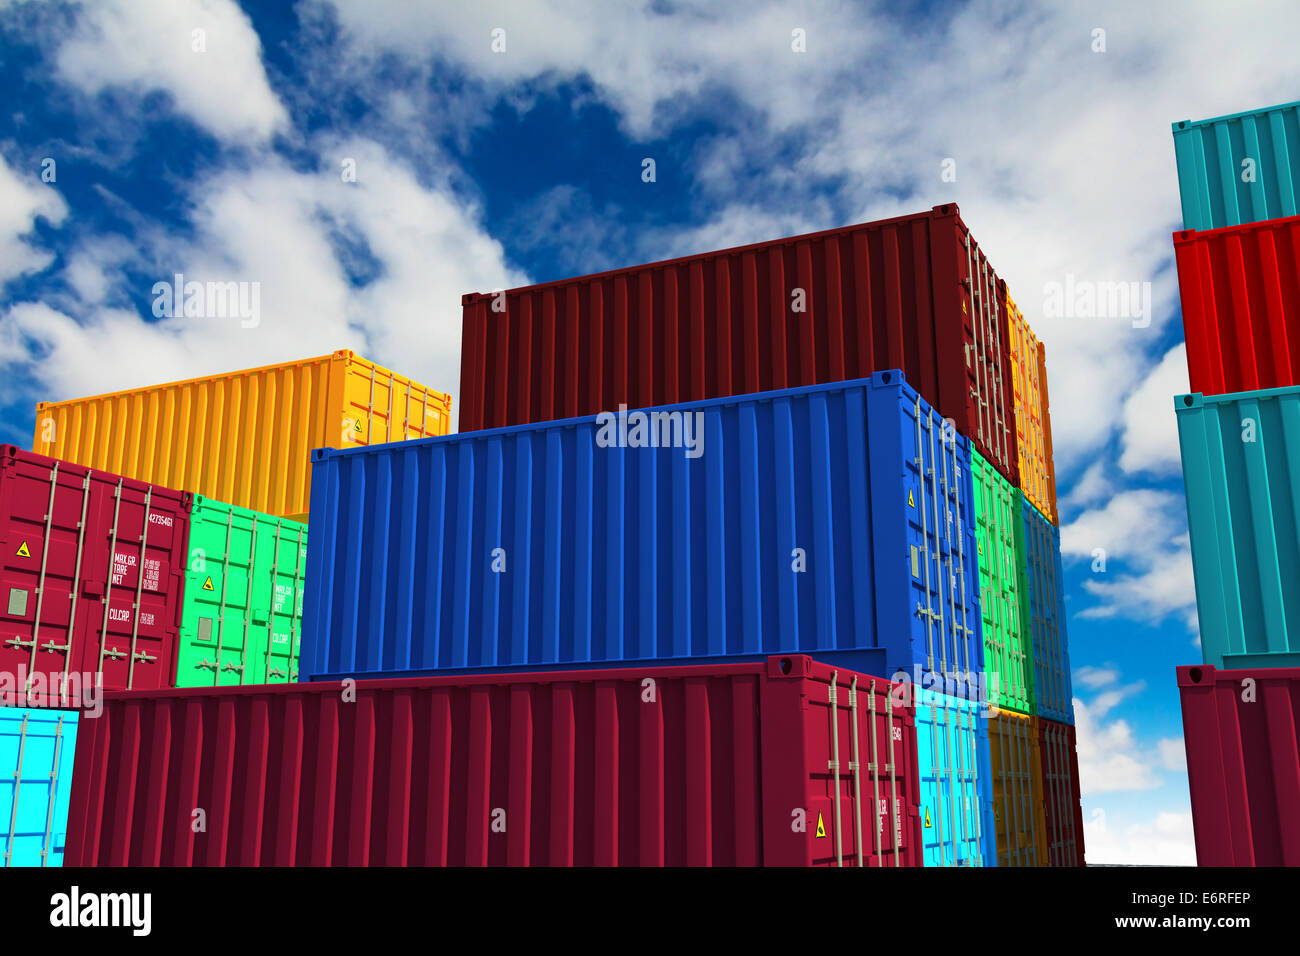 Stacked Cargo Containers on Sky Background. Stock Photo